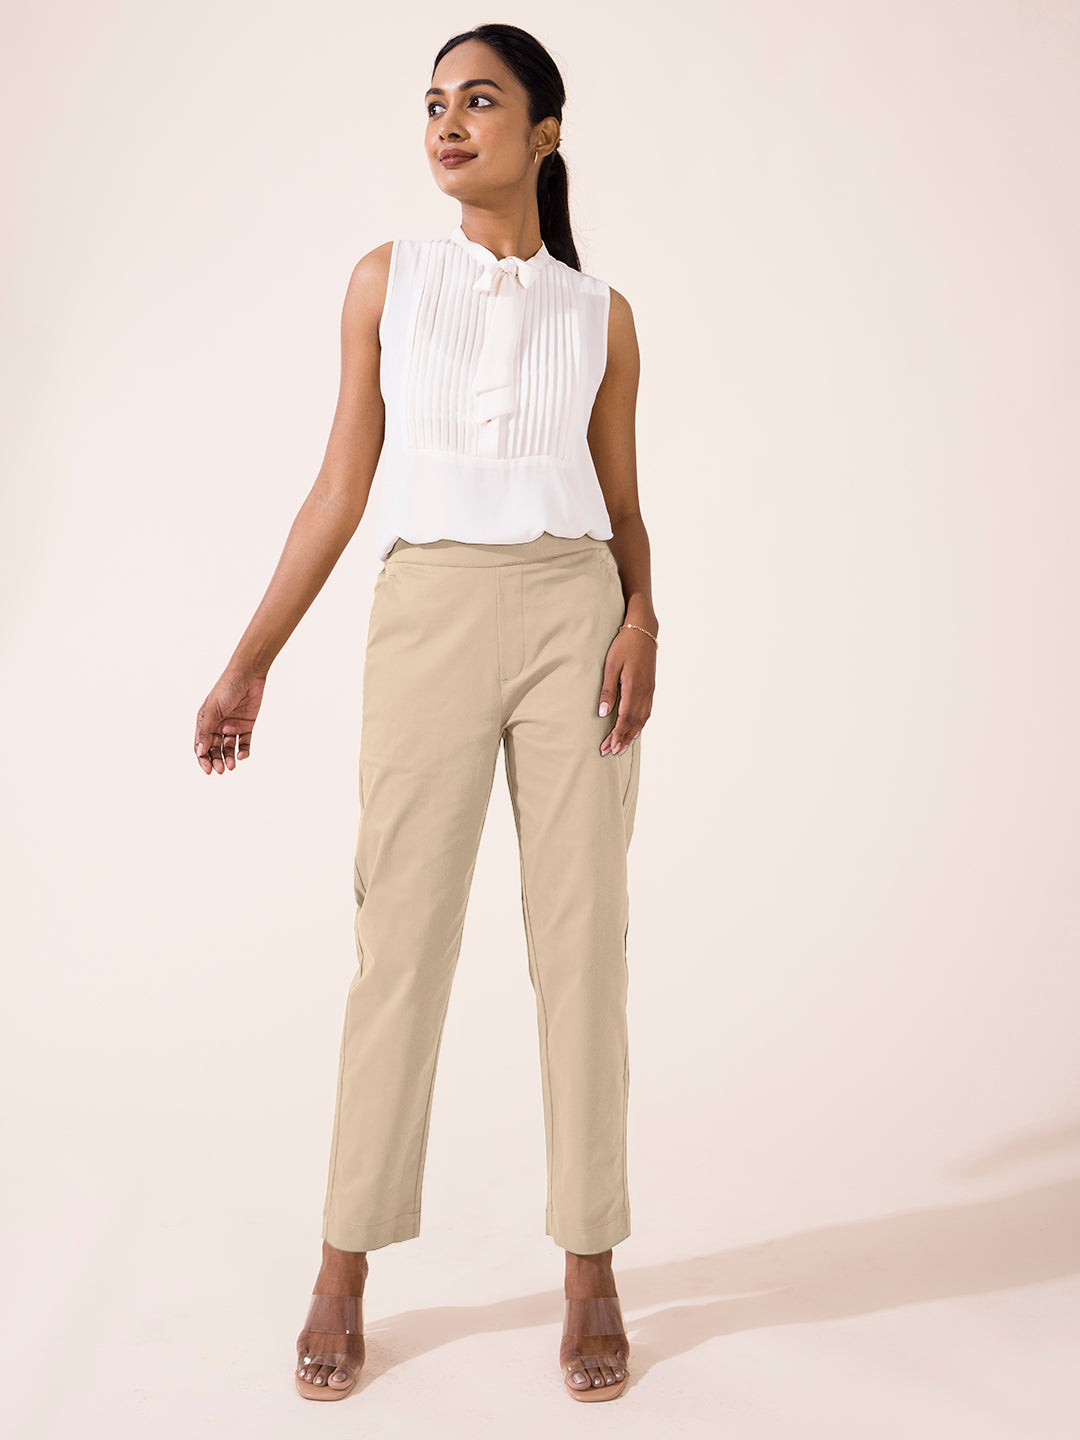 Women's Trousers | Women's Chinos and Boyfriend Trousers | ASOS